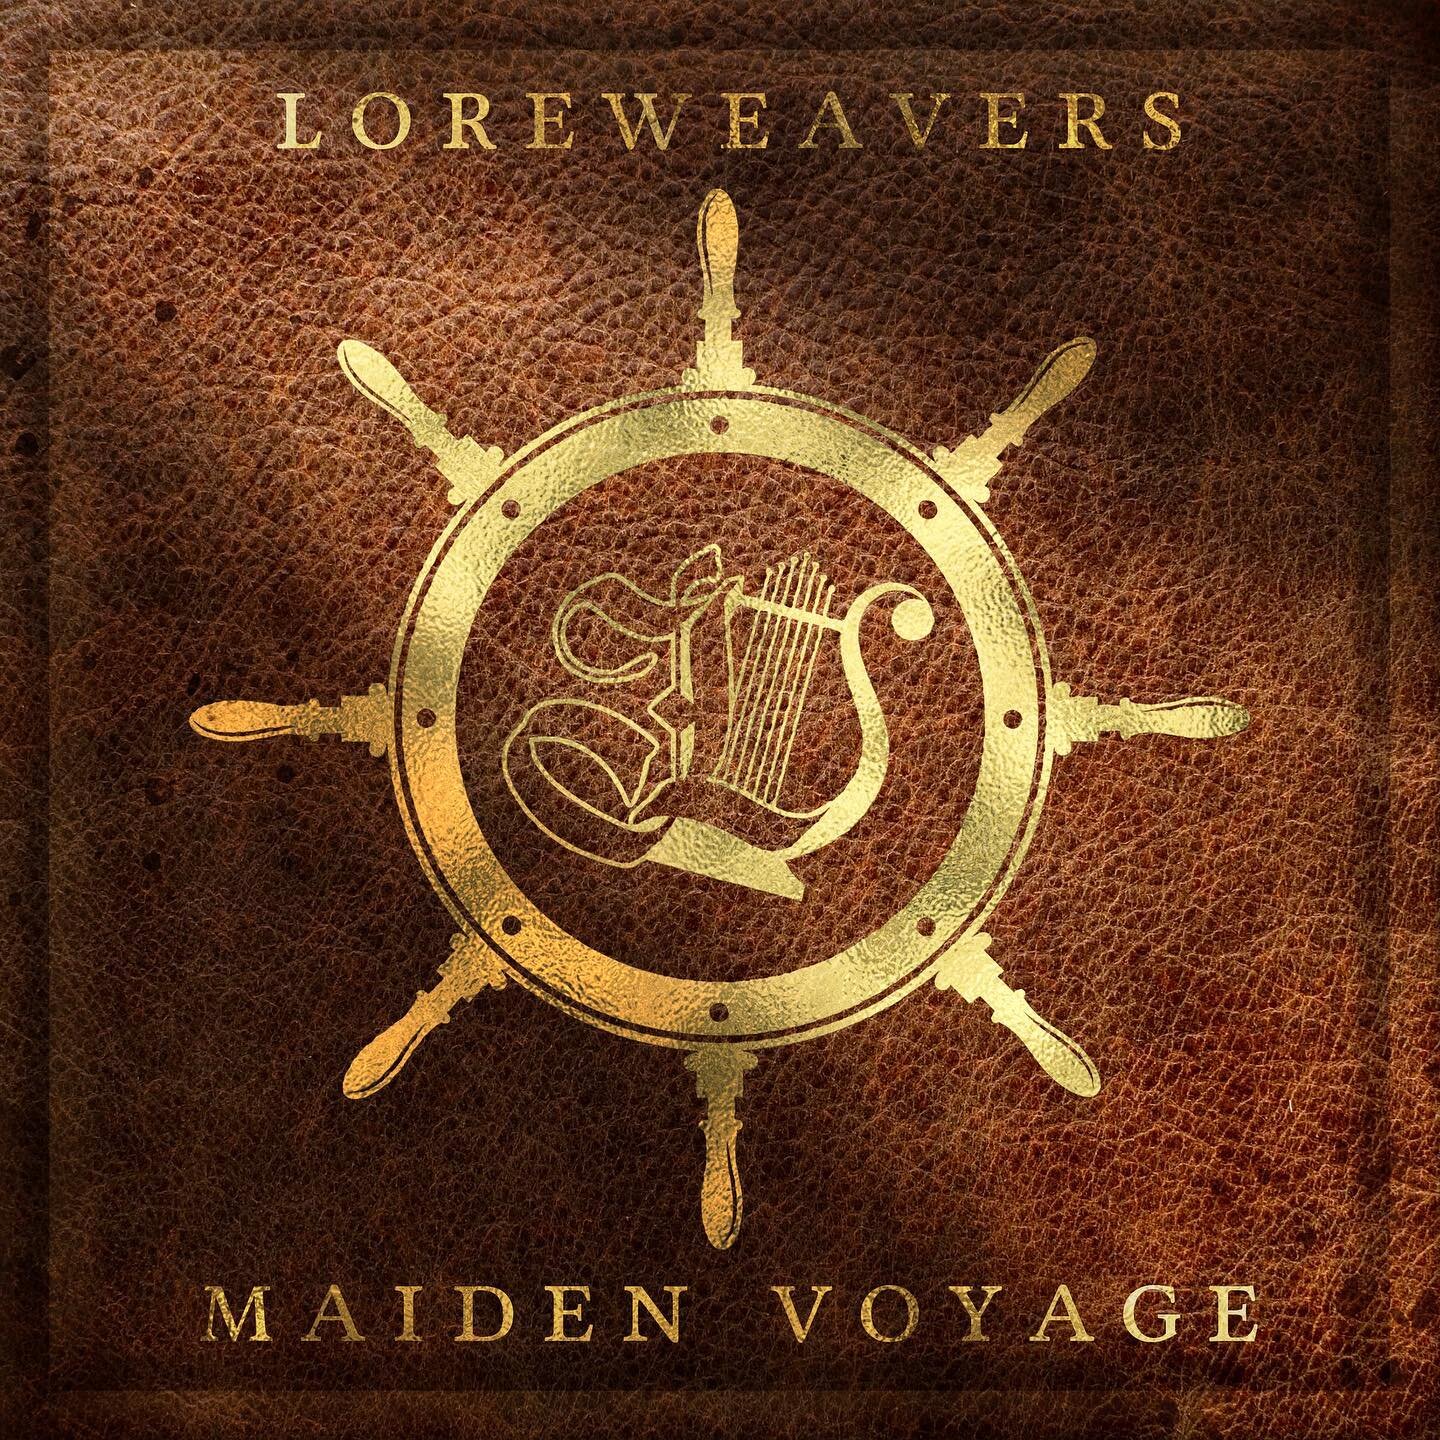 ⚓️🍻Without further ado, we&rsquo;re happy announce that our new sea shanty EP, Maiden Voyage, officially leaves the harbor on August 12! If you don&rsquo;t feel like waiting that long, you can get yourself an advanced limited physical copy this week